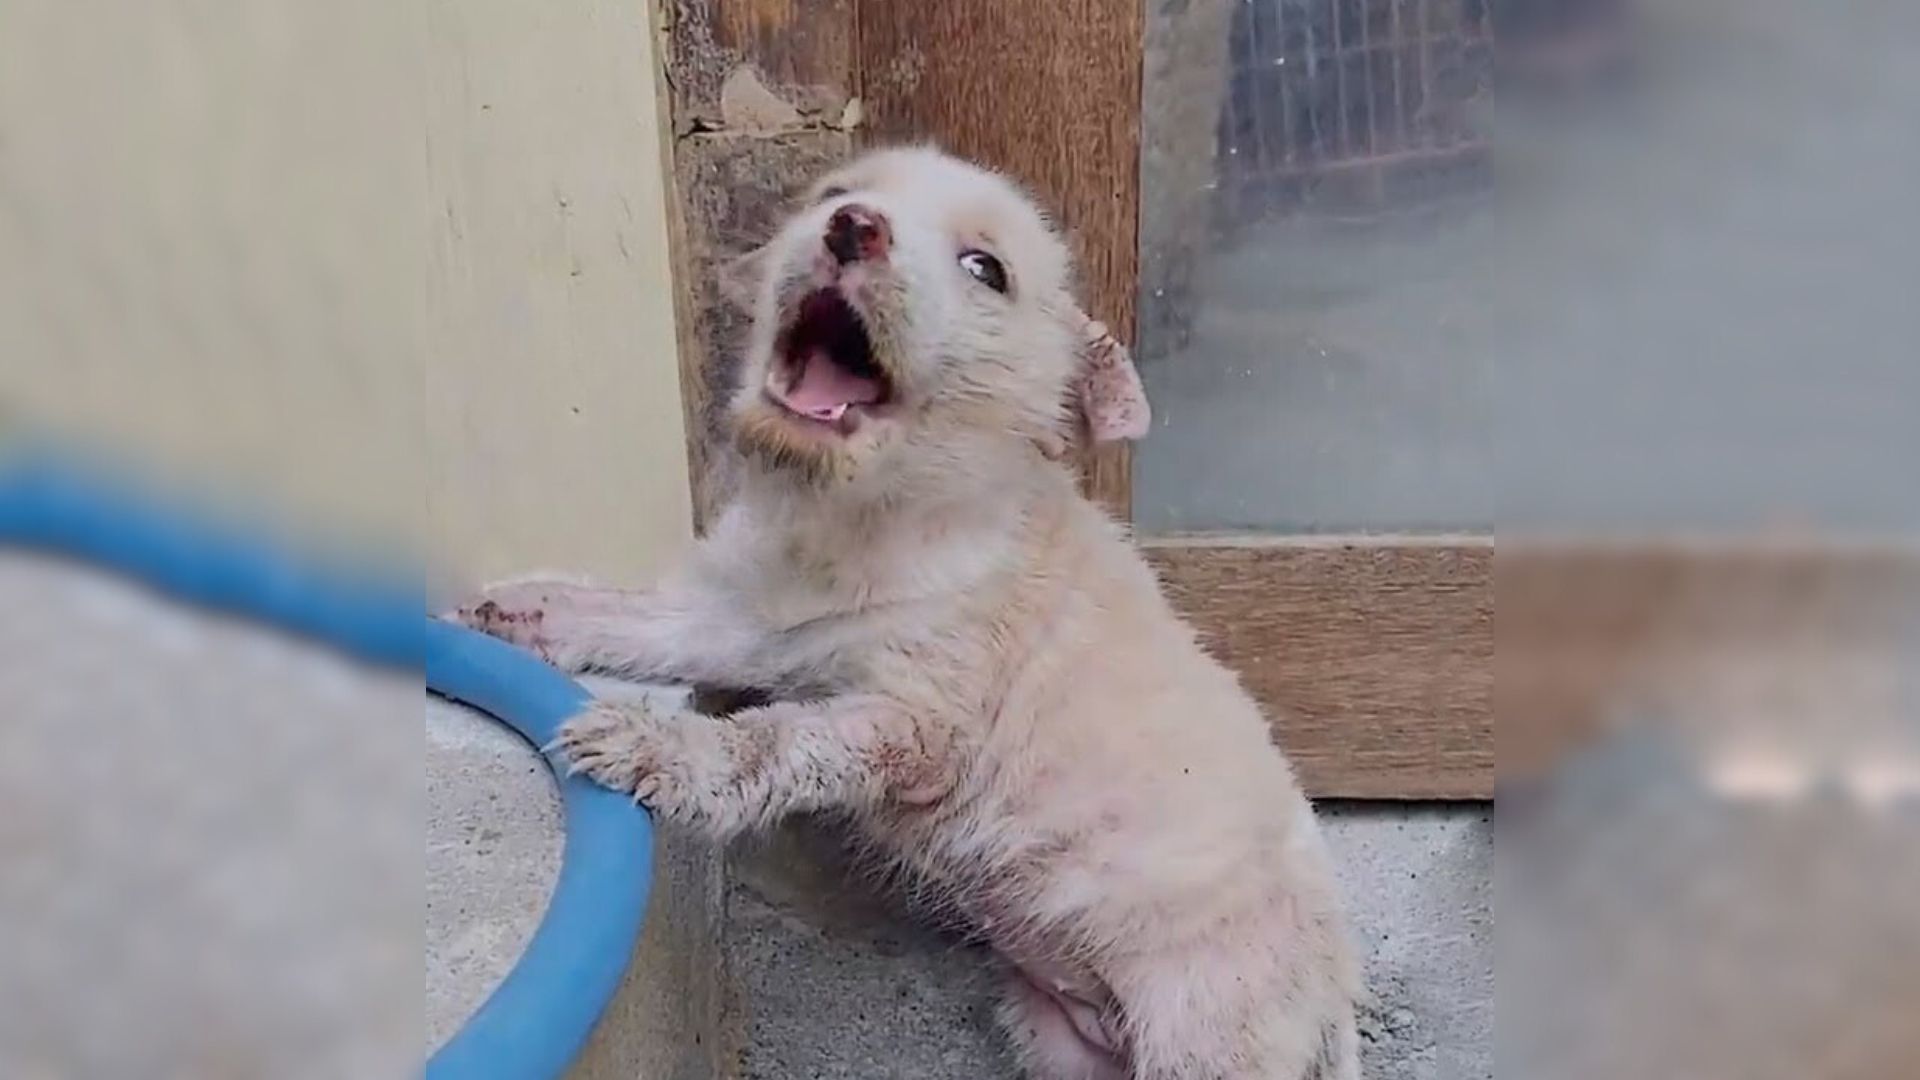 Tiny Dog Abandoned At A Local Market Cries Loudly, Hoping For Kindness